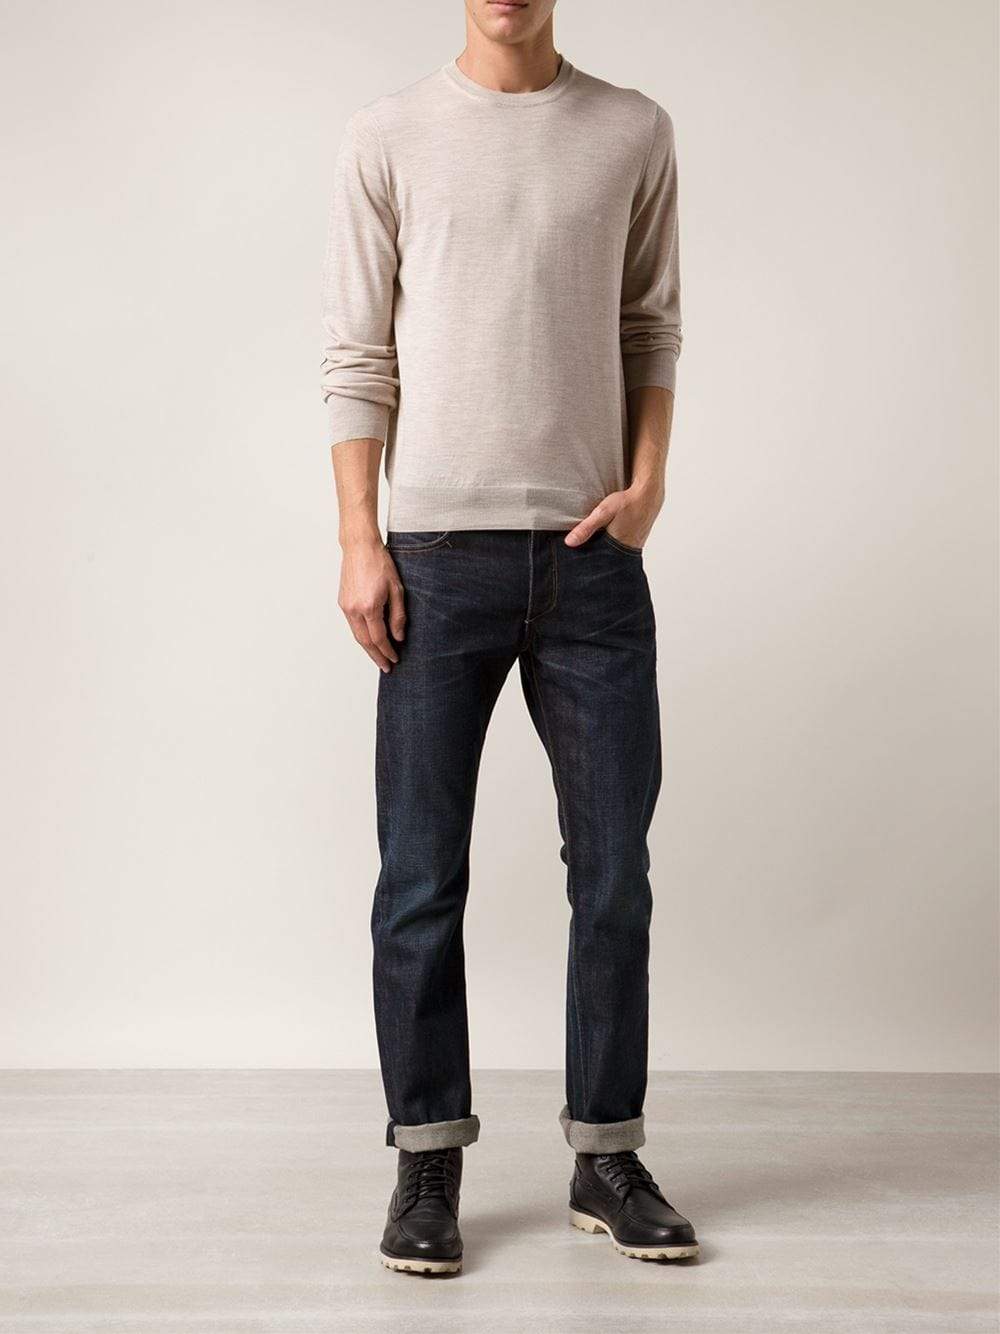 Elbow Patch Sweater MENSCLOTHINGSWEATER BRUNELLO CUCINELLI   